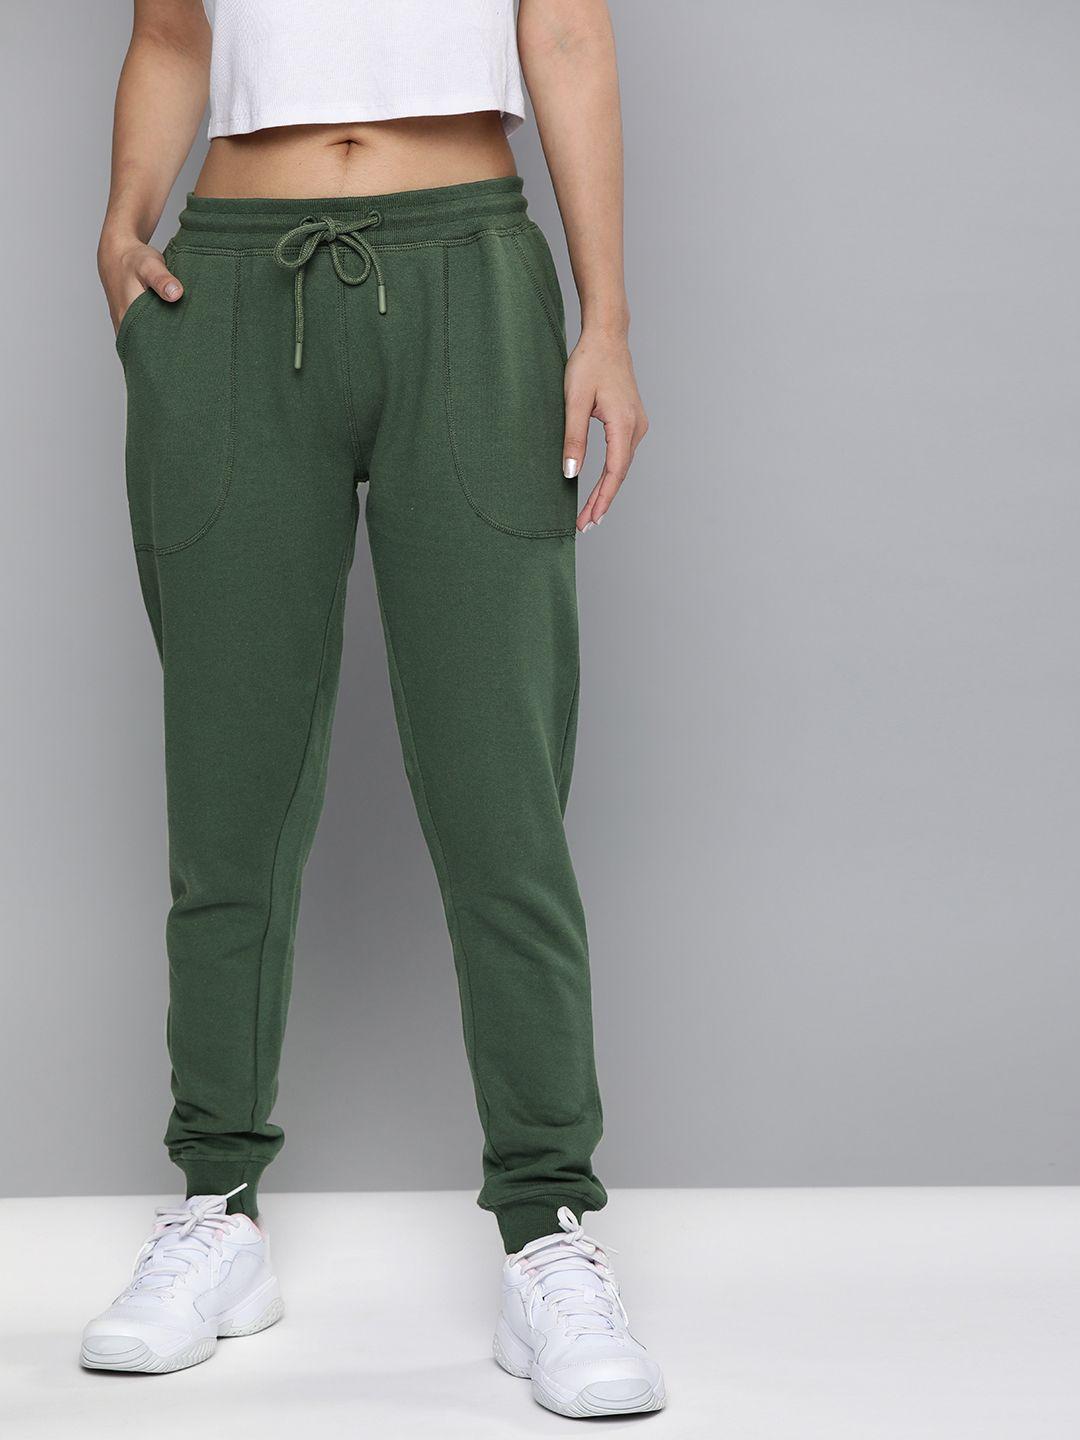 harvard woman's olive green solid track pants